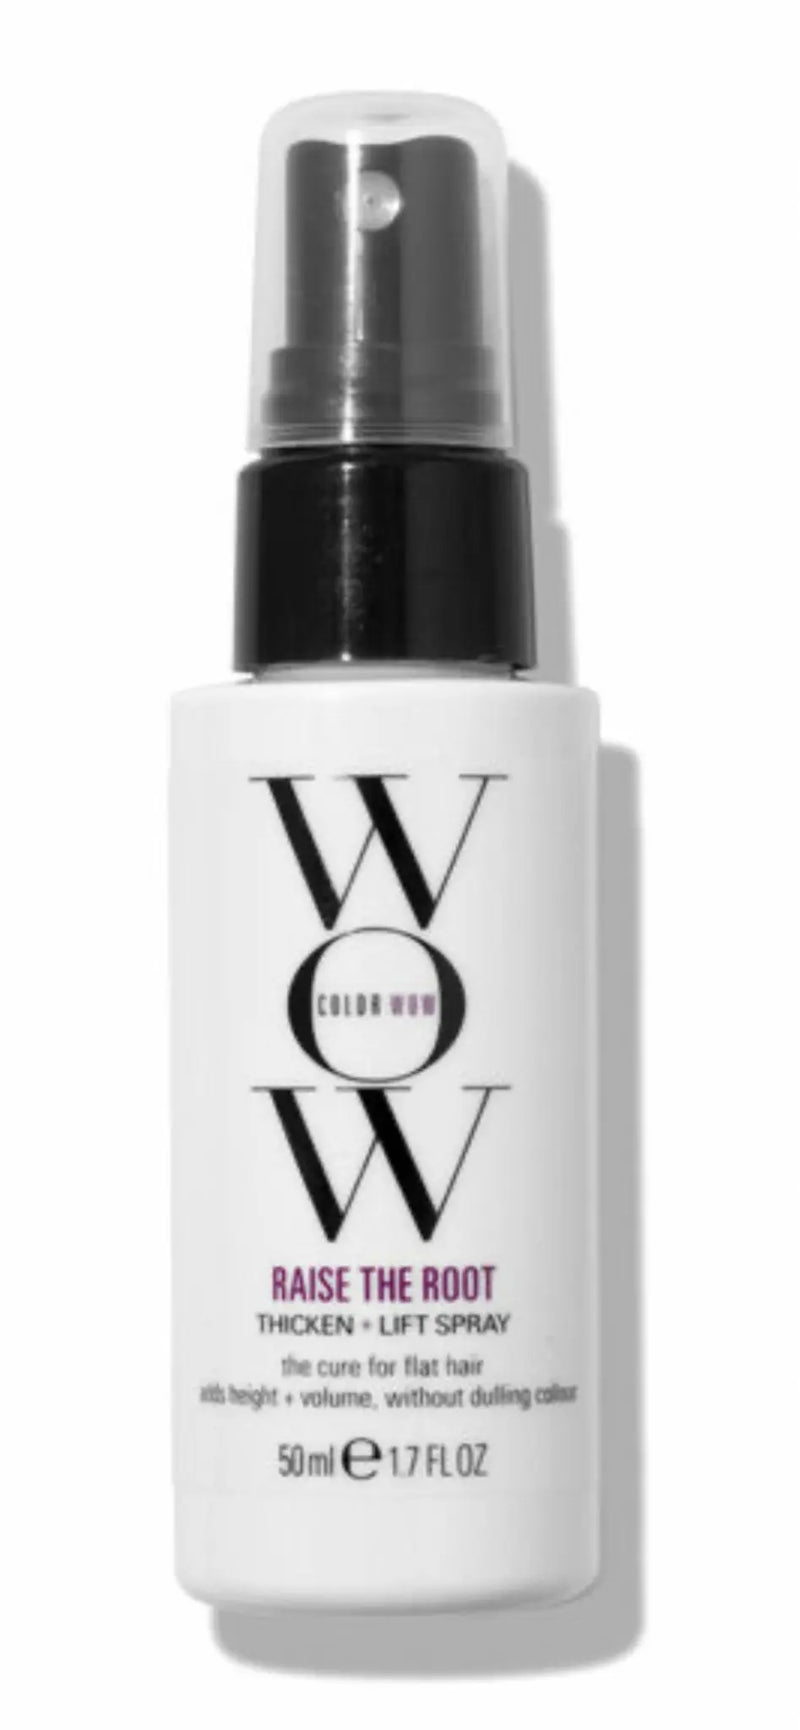 Color Wow Raise The Root  Root Lifter For Fine Hair